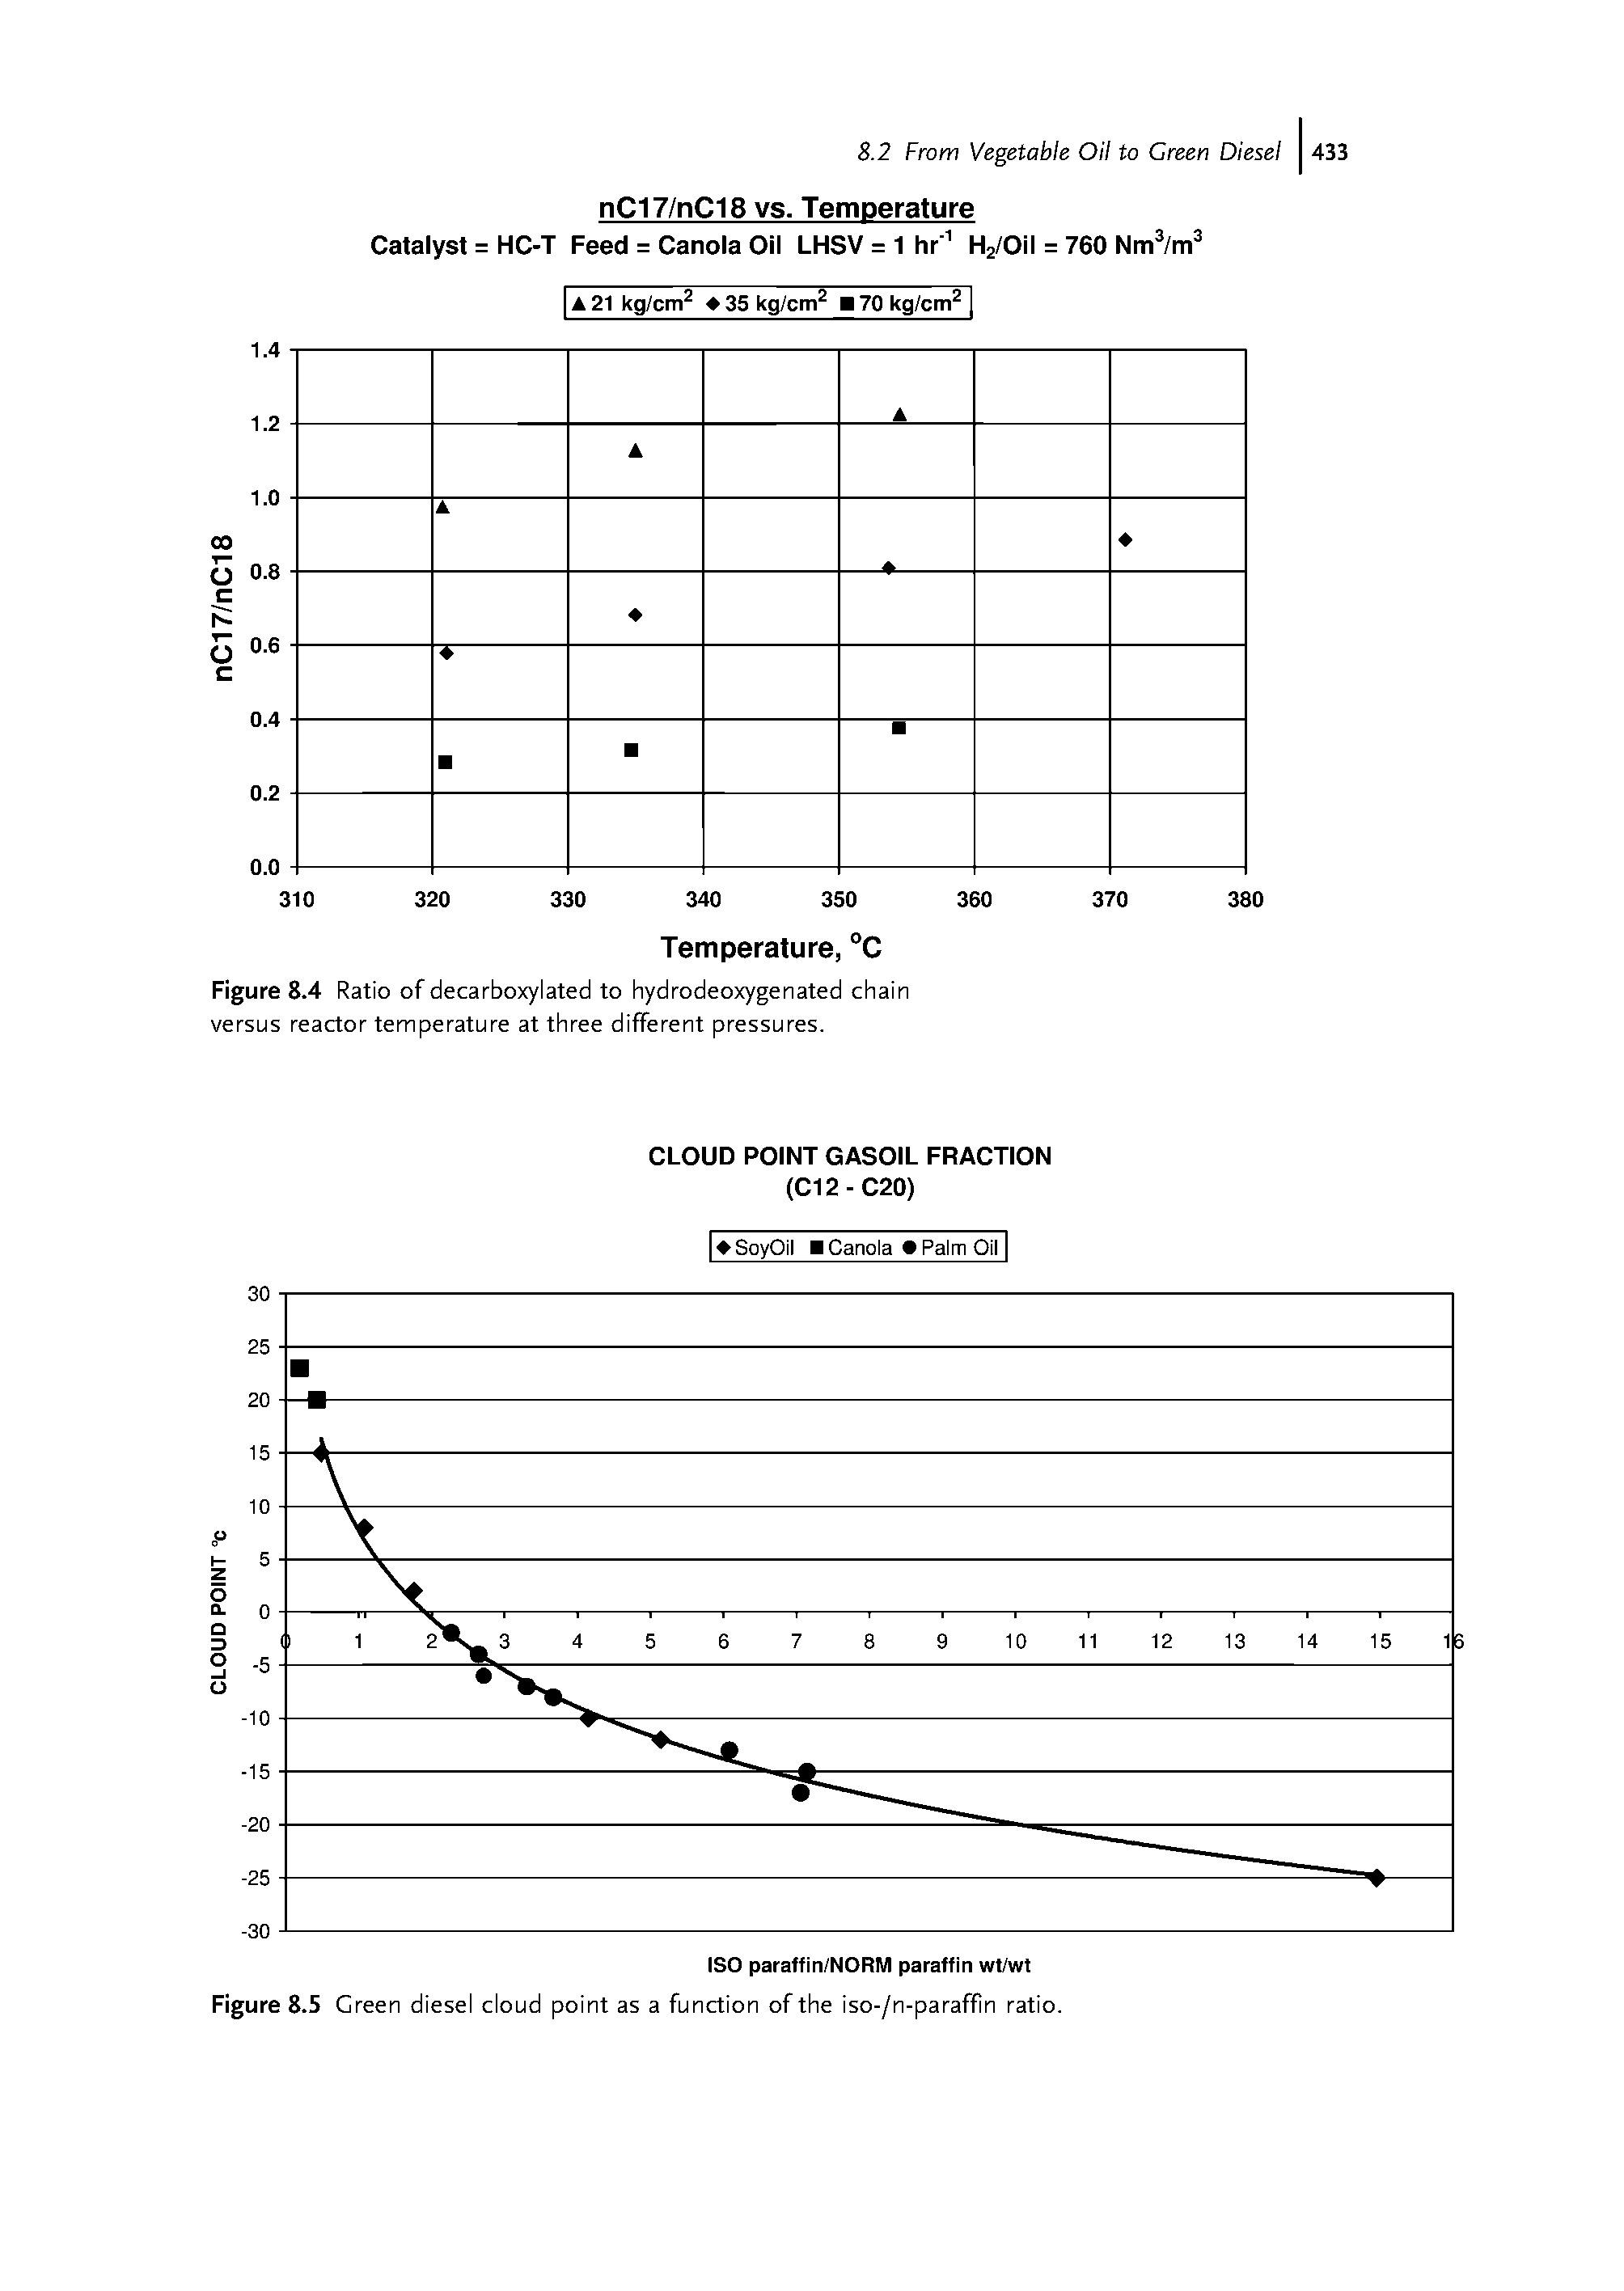 Figure 8.5 Green diesel cloud point as a function of the iso-/n-paraffin ratio.